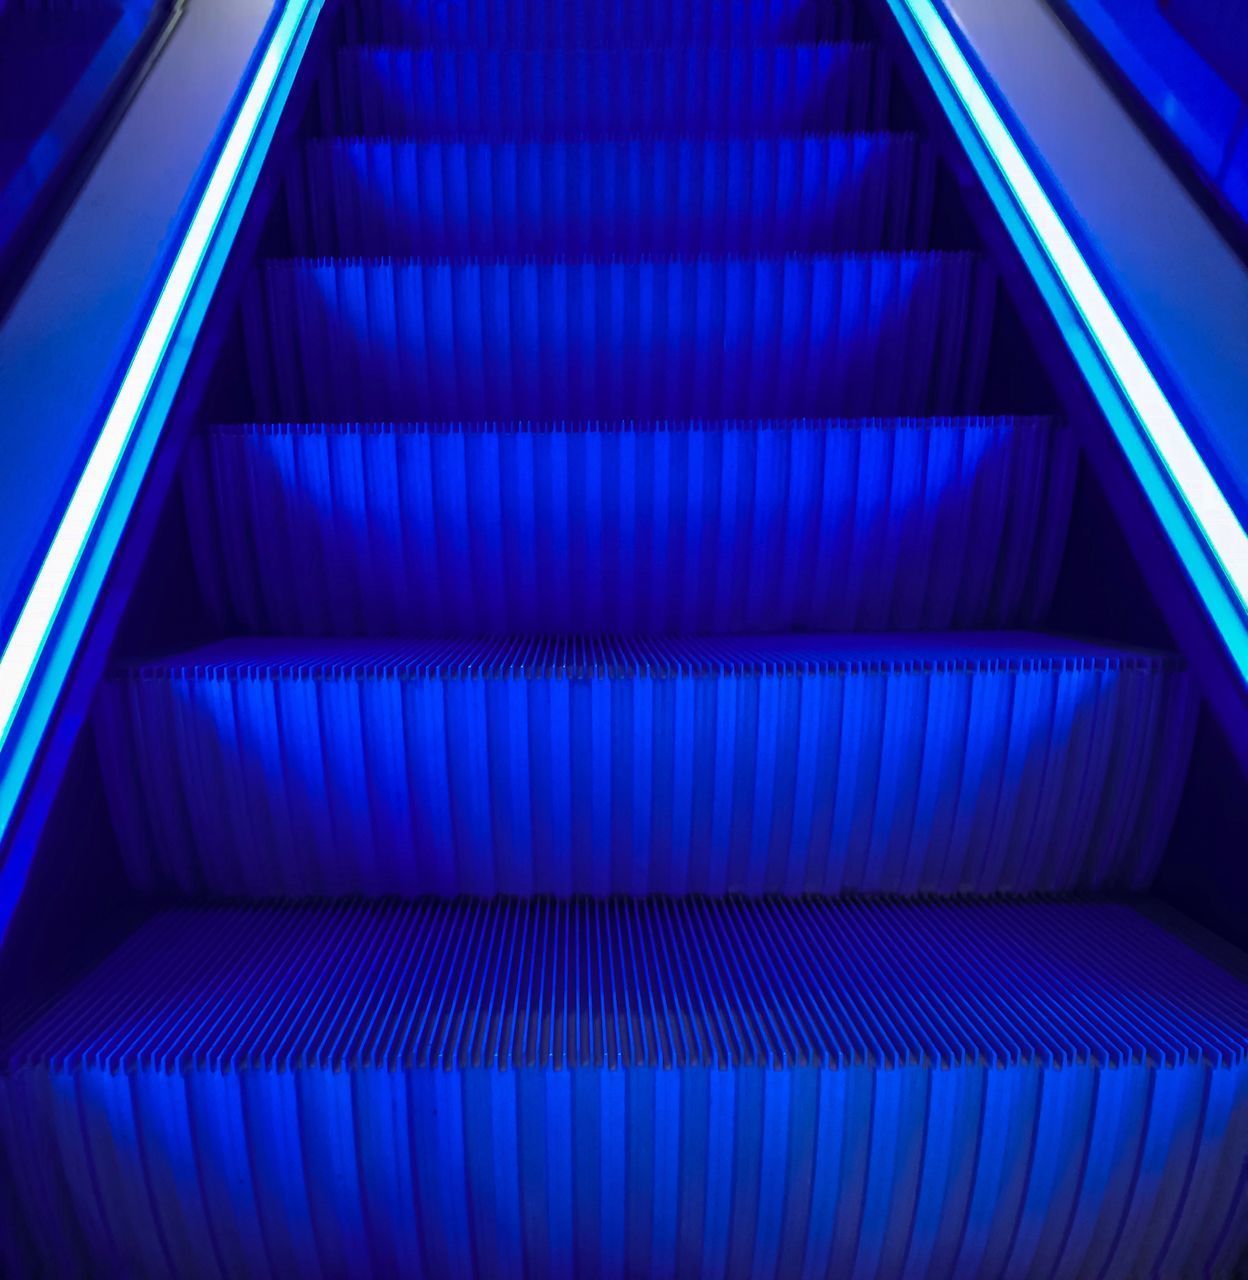 HIGH ANGLE VIEW OF ESCALATOR IN BLUE STAIRCASE